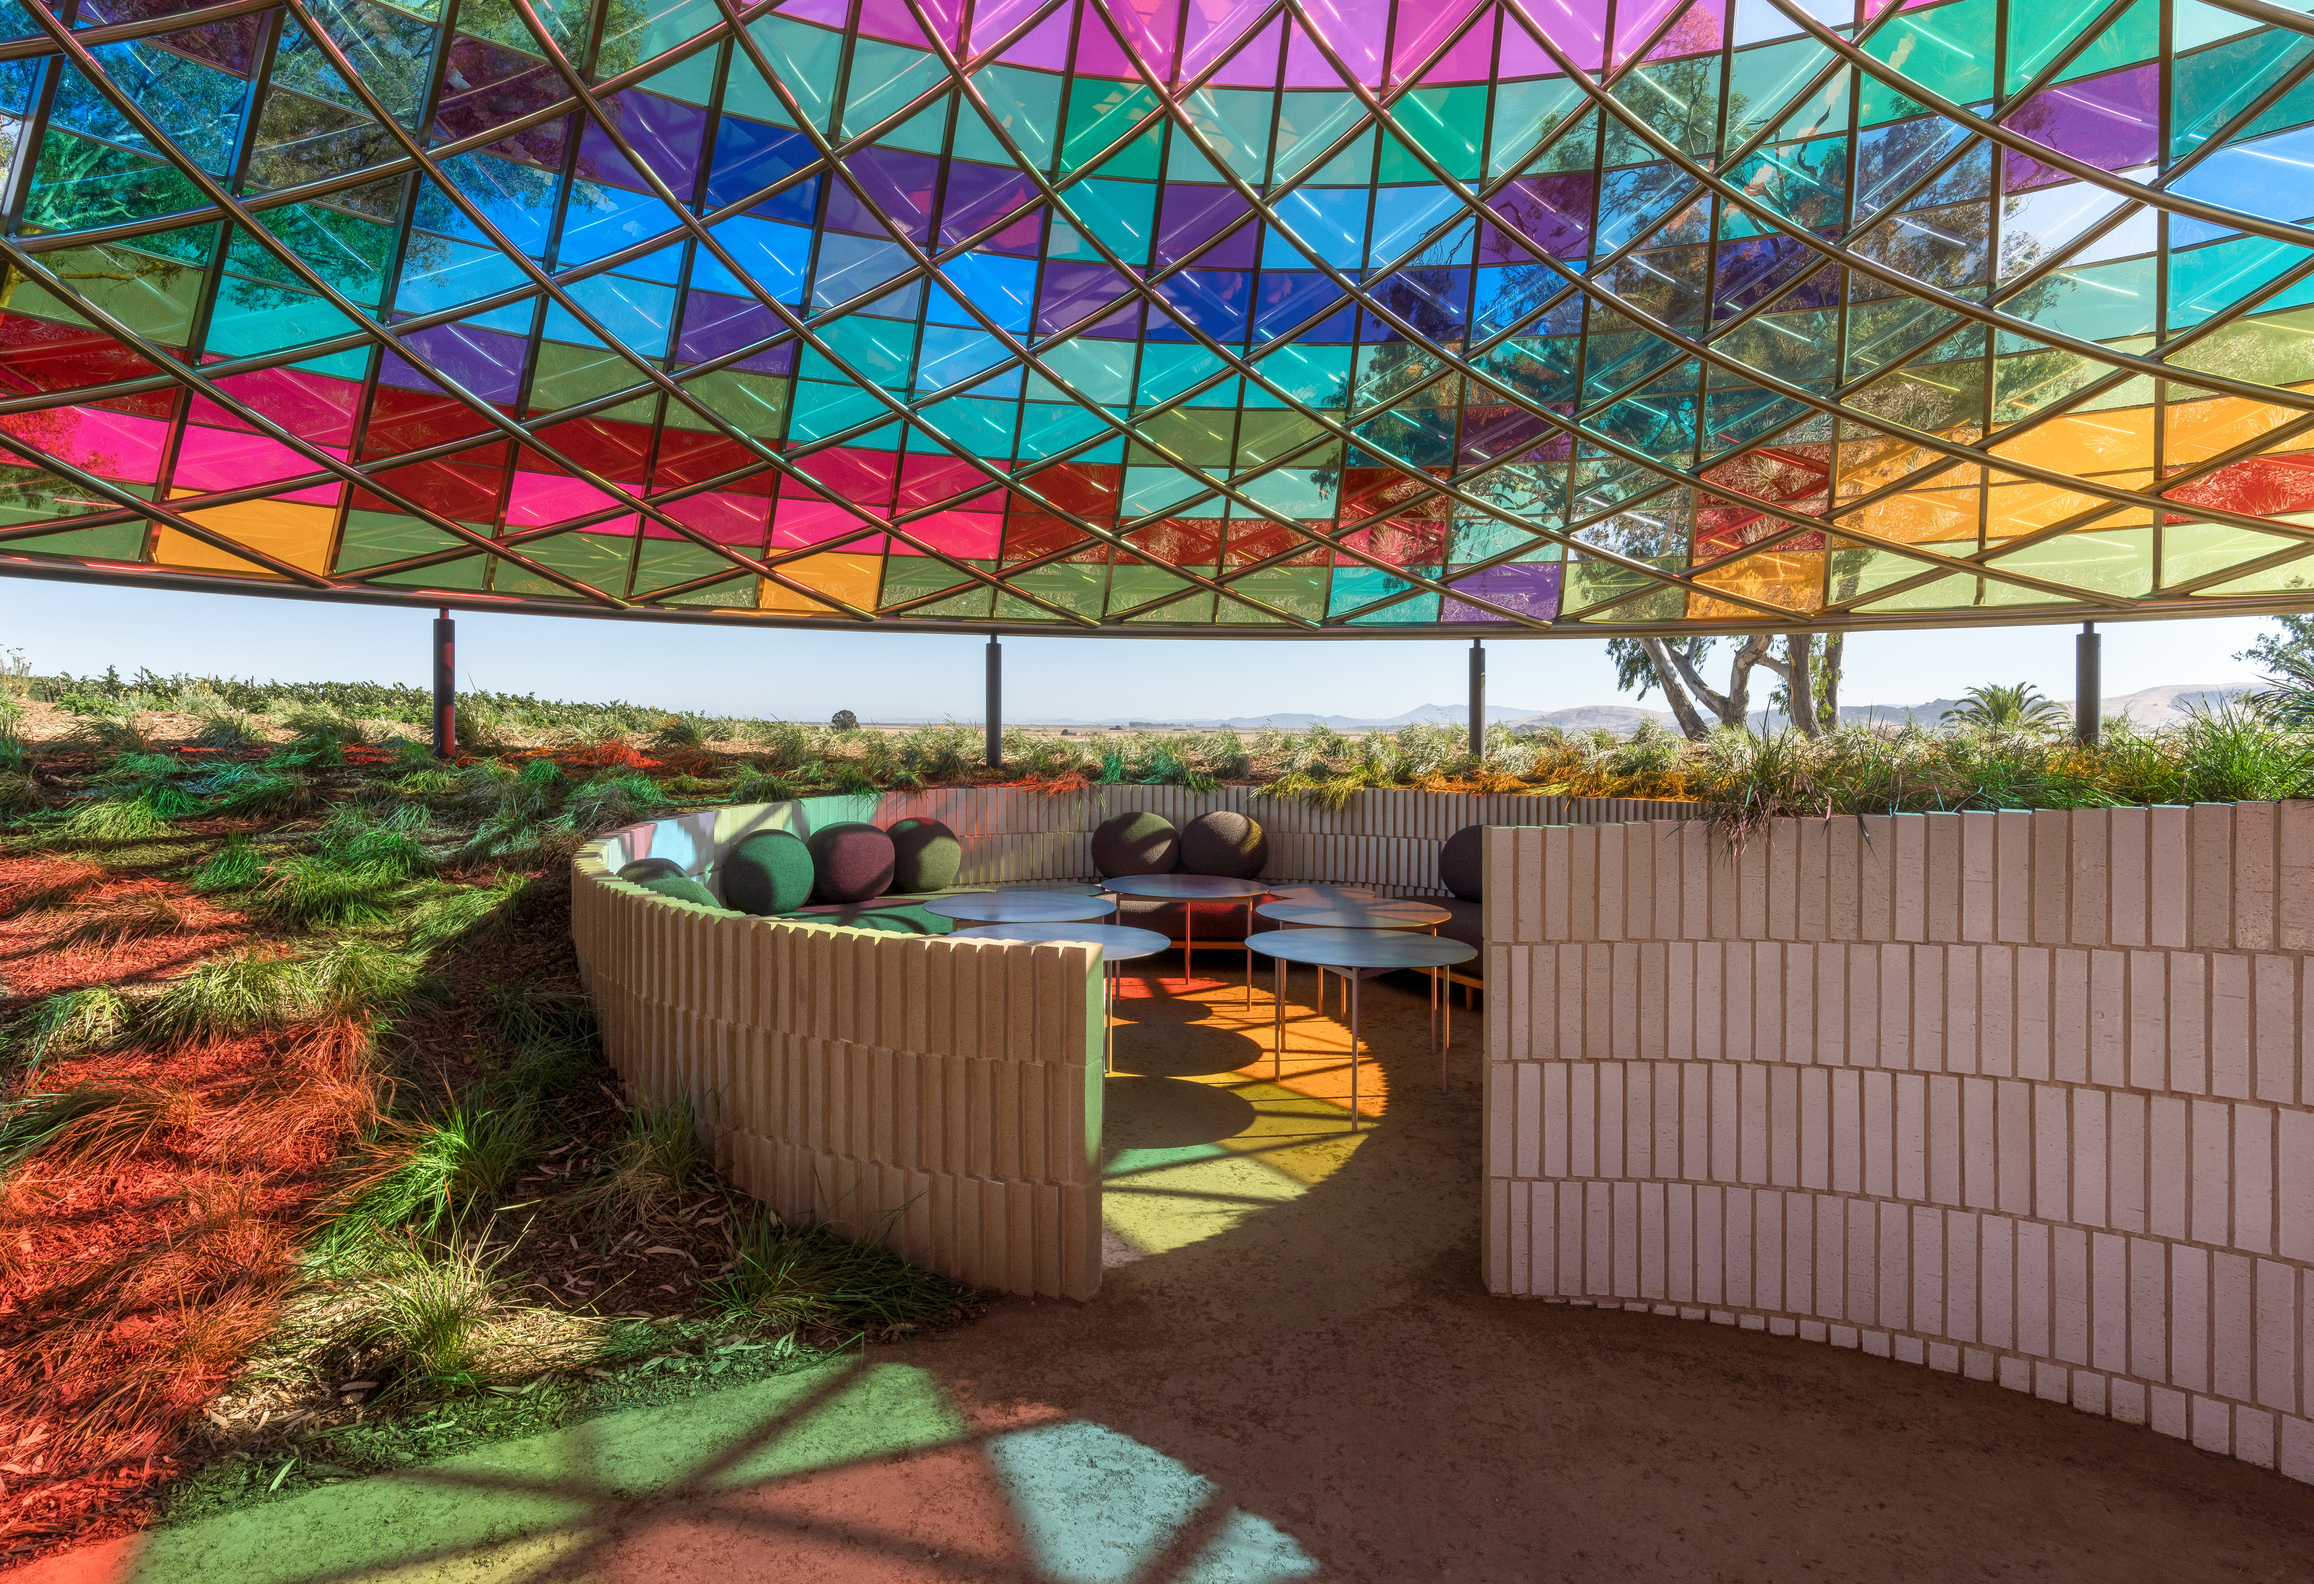 EMBRACE COLORFUL VIBES：Vertical Panorama Pavilion 为城市活力上色 - 万花筒艺术品酒亭